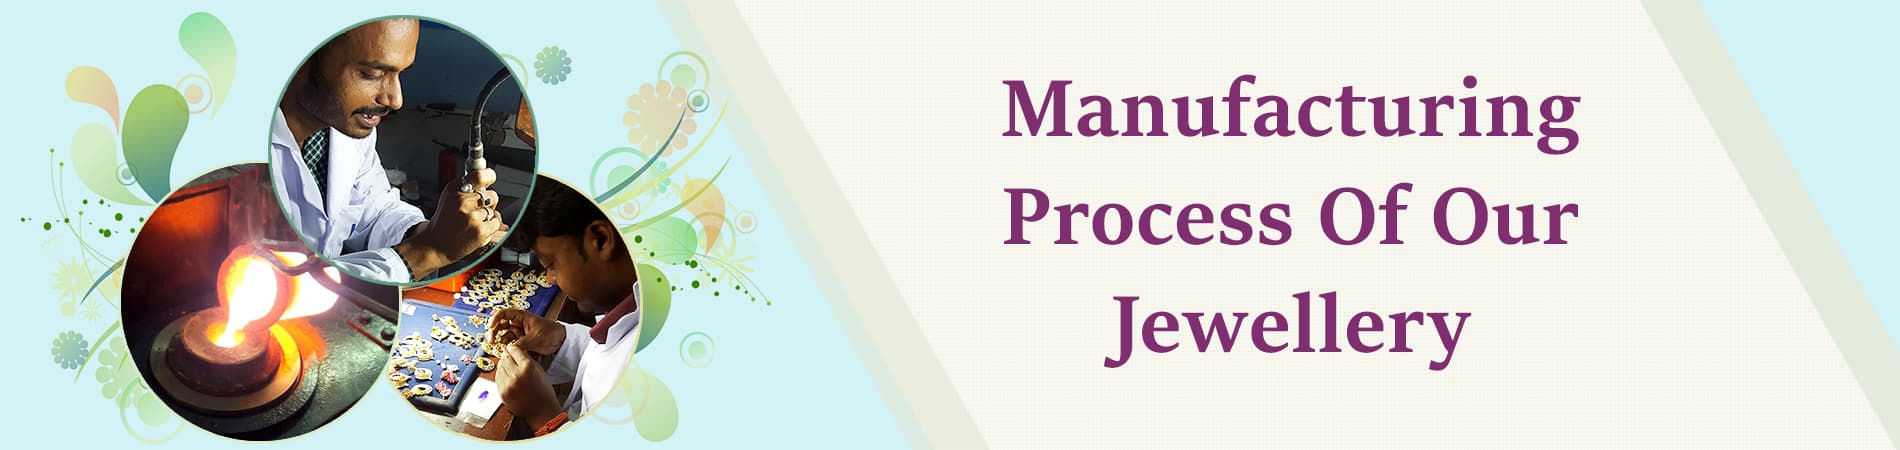 1580714641_Manufacturing_Process_Of_Our_Jewellery.jpg